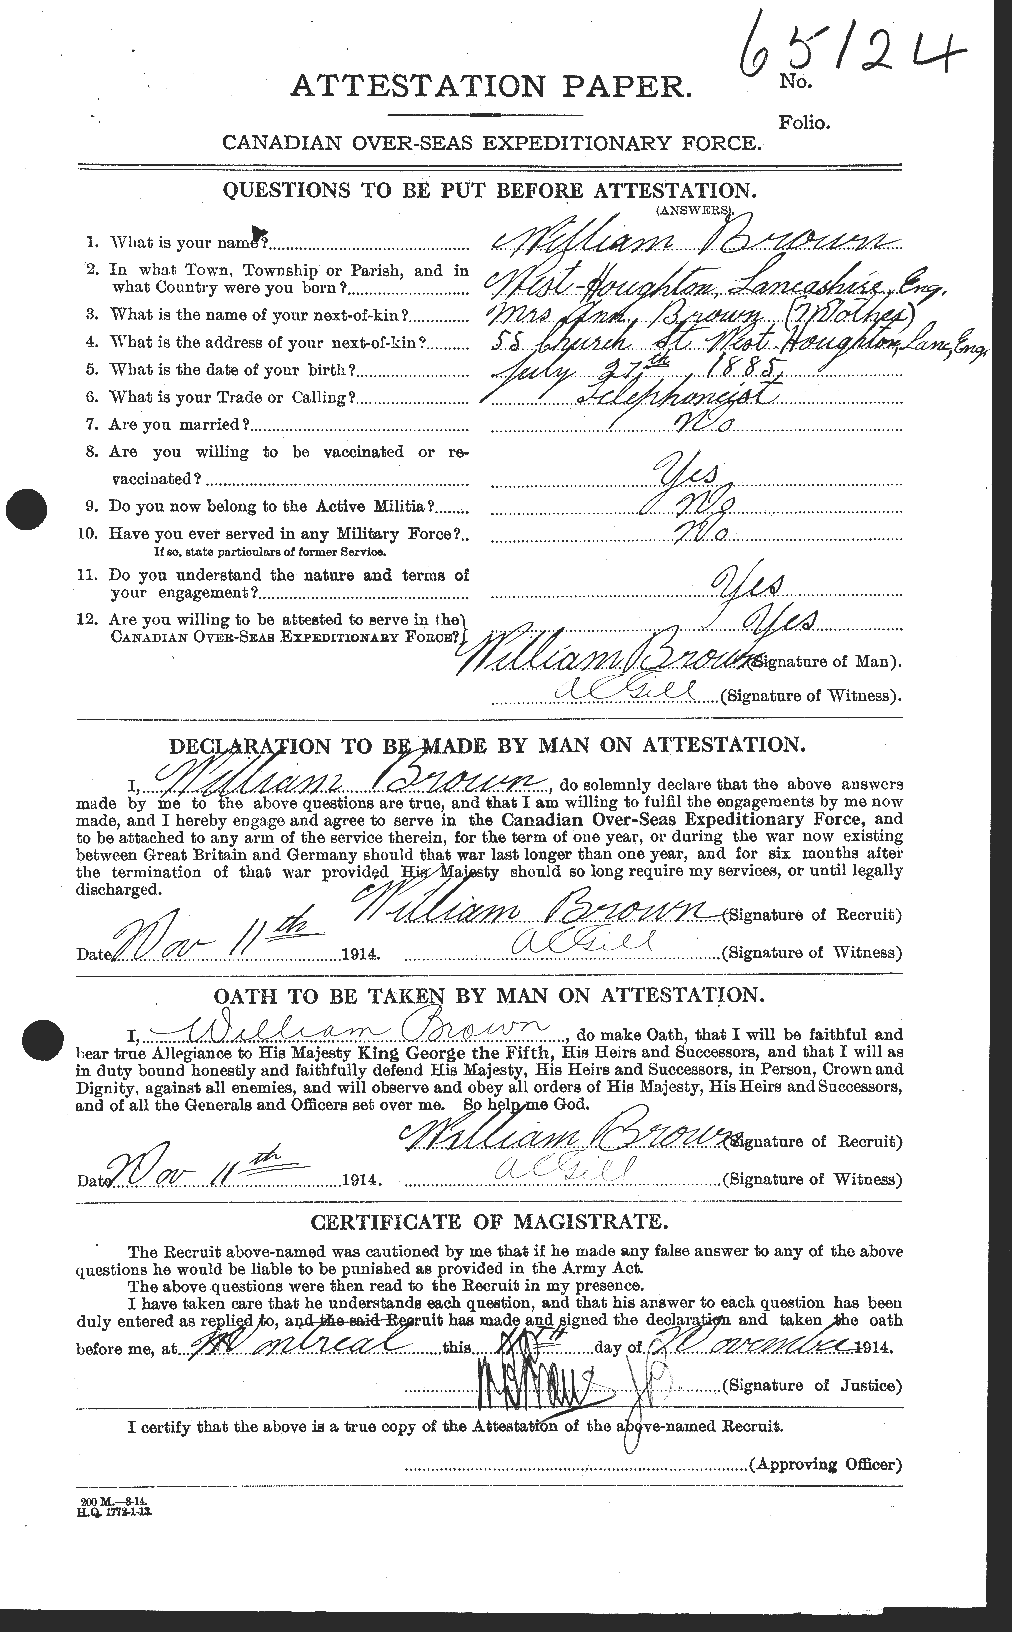 Personnel Records of the First World War - CEF 268073a